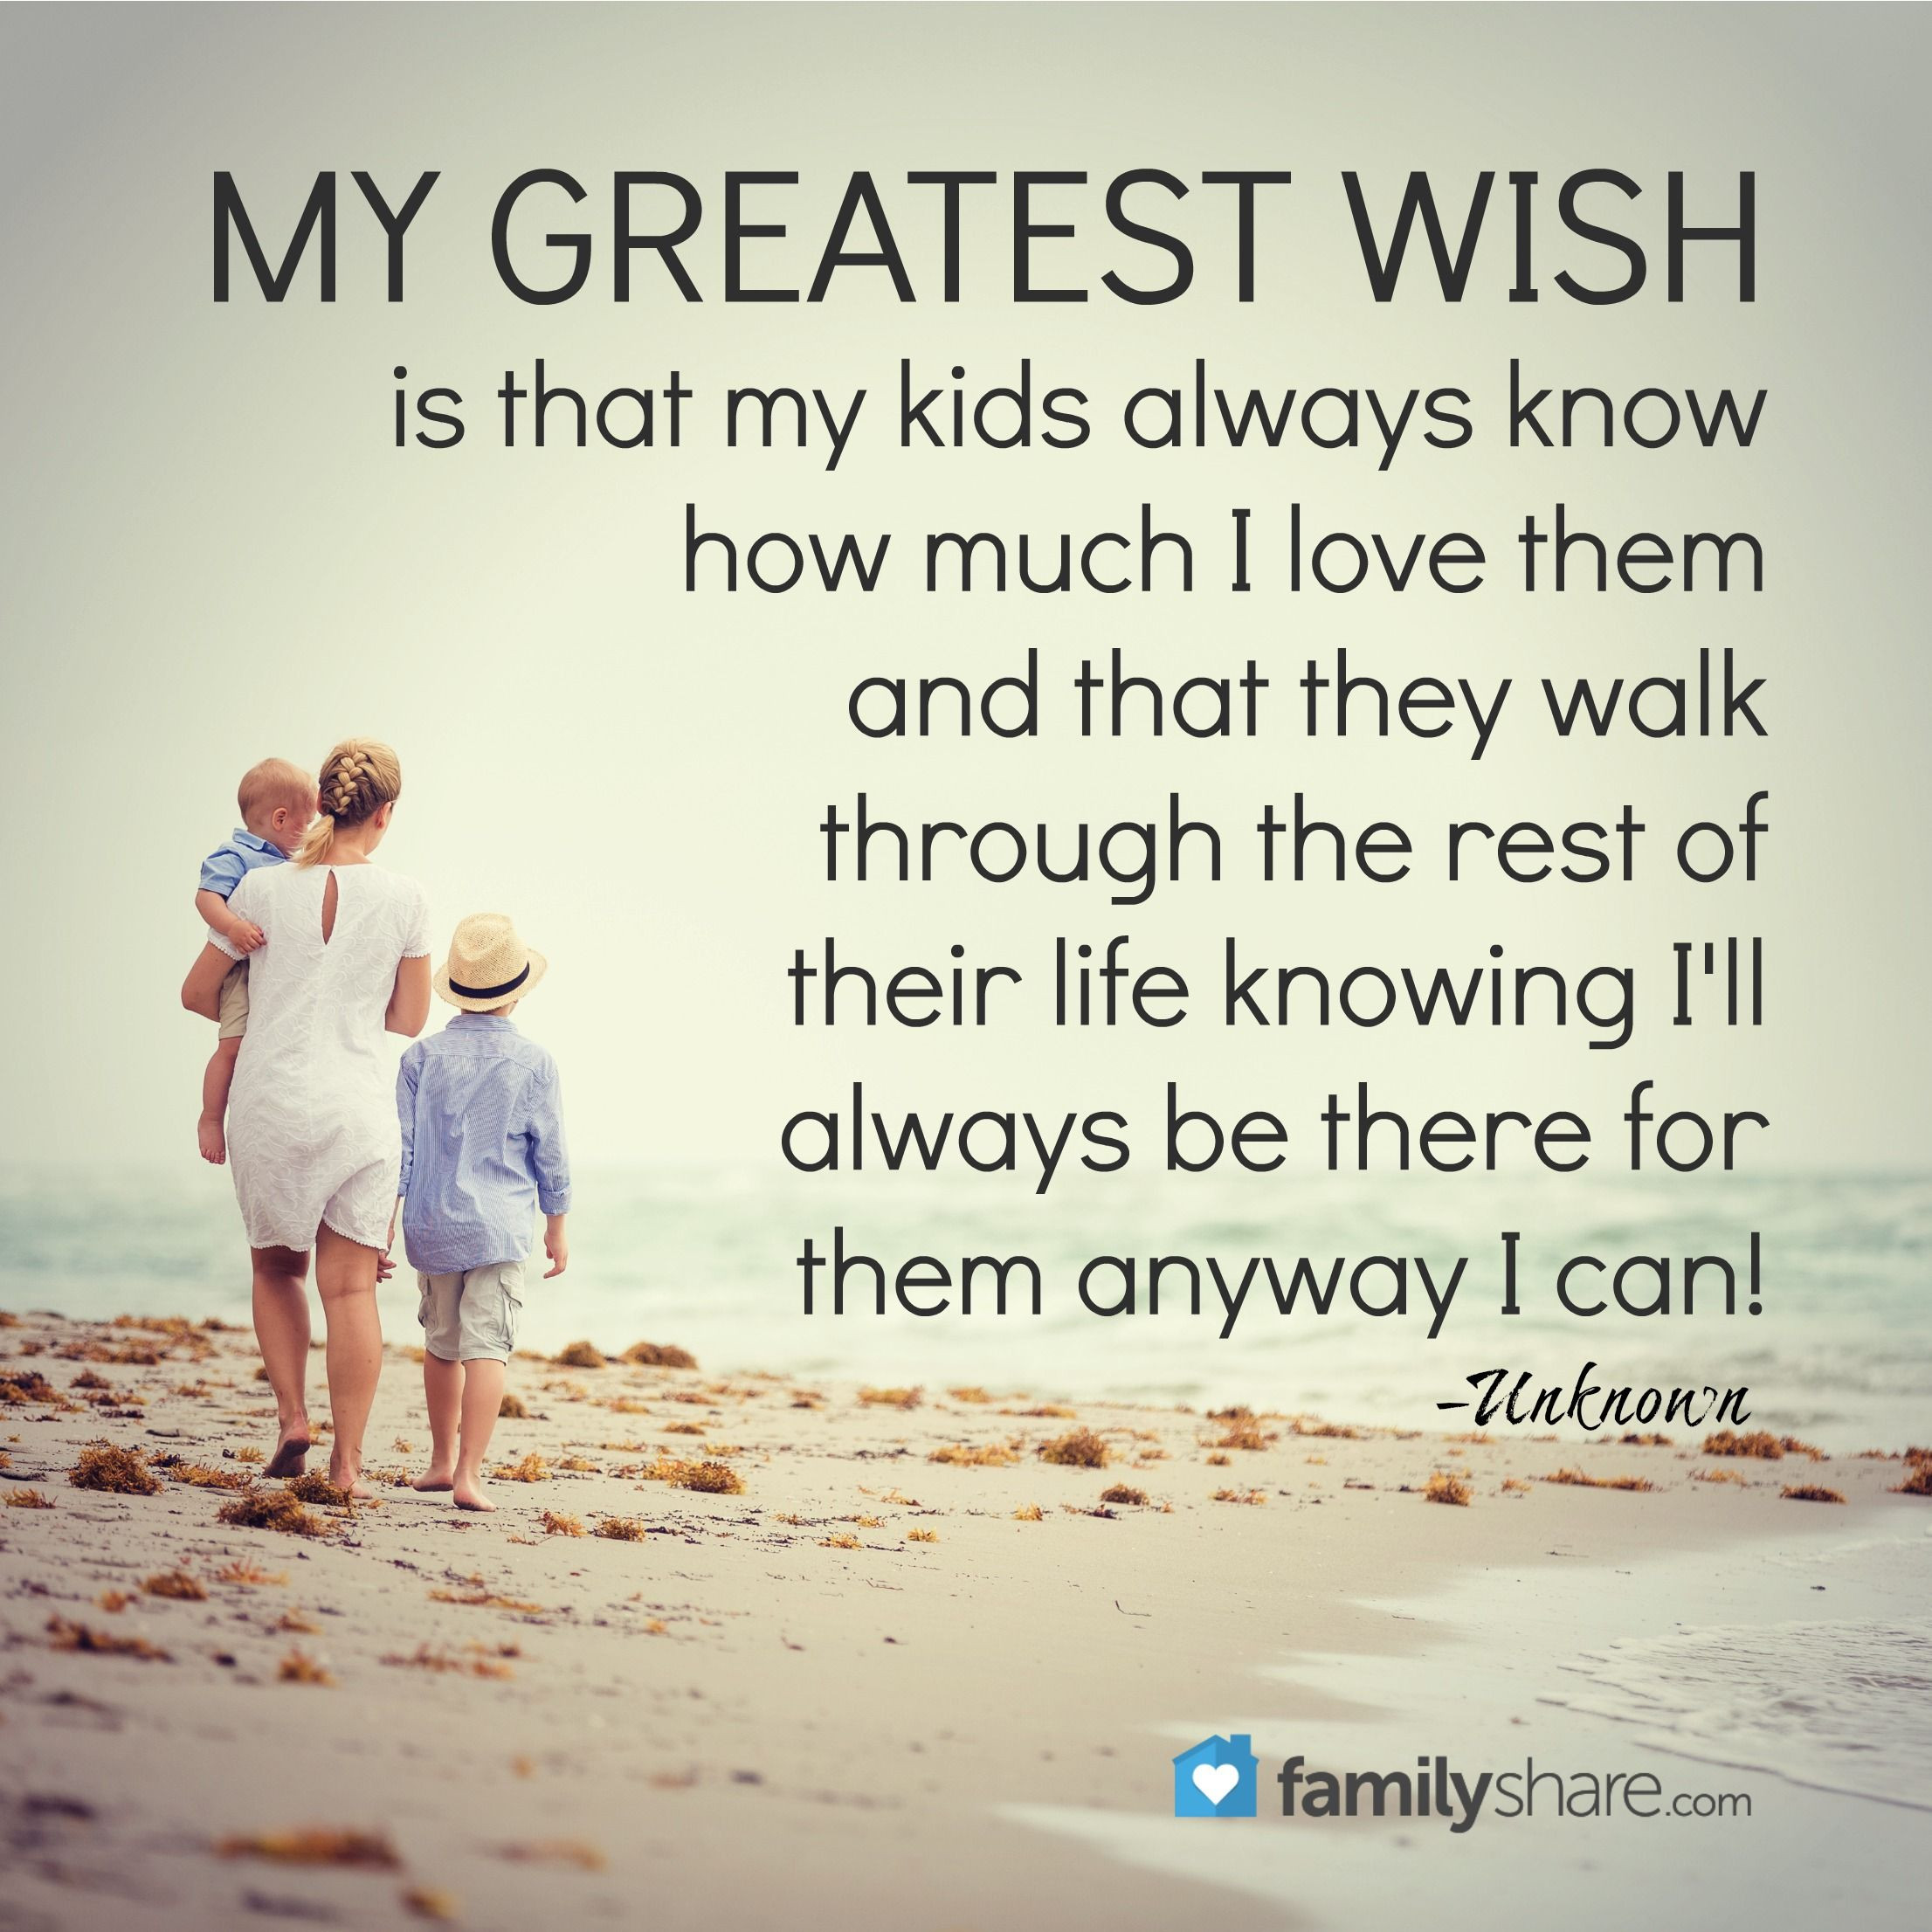 My Beautiful Children Quotes
 My greatest wish is that my kids always know how much I